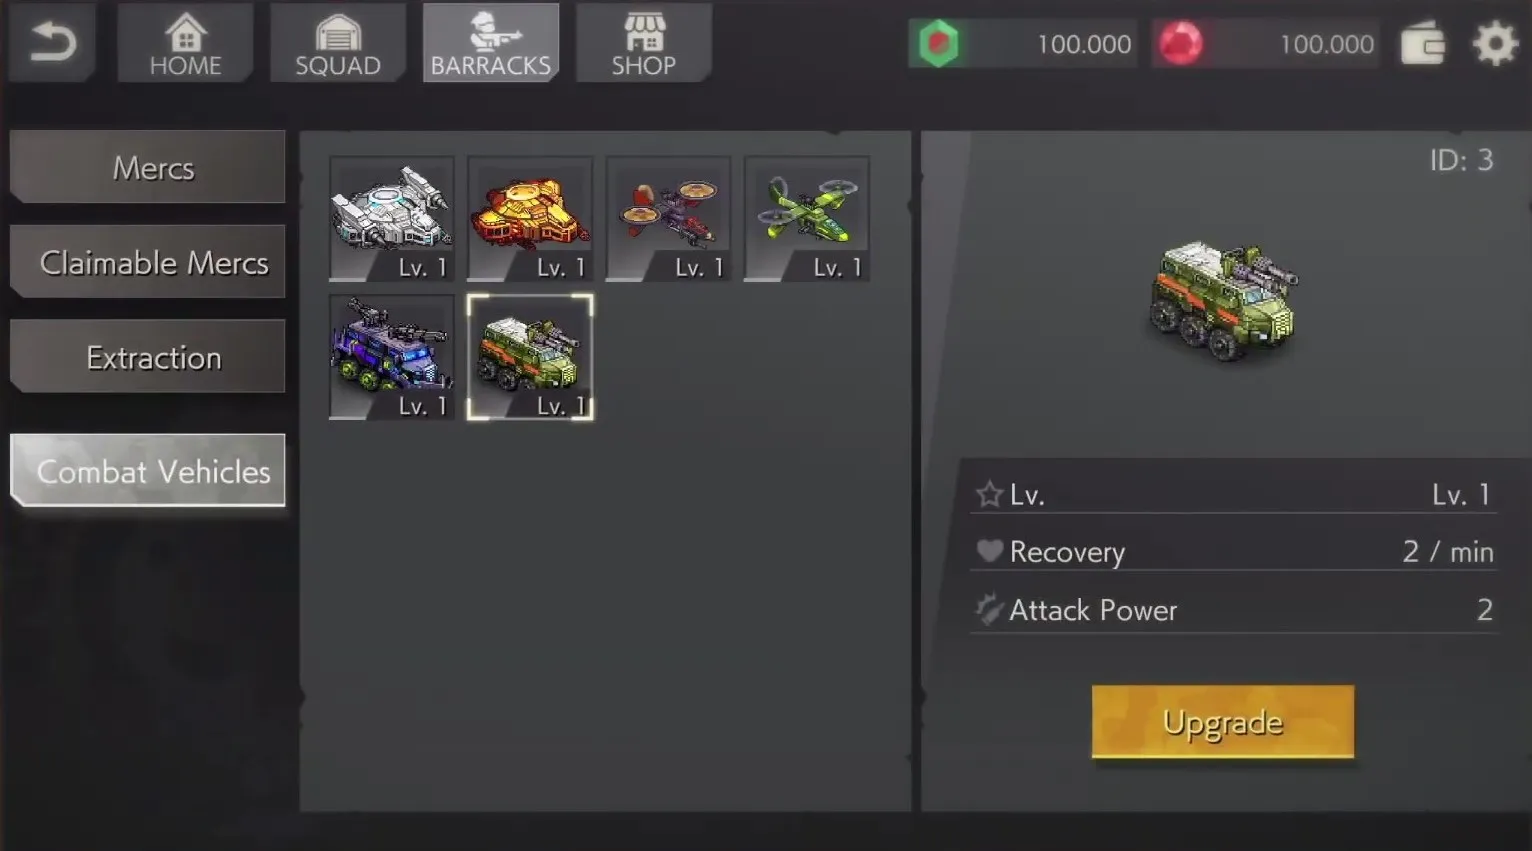 Players can also use in-game resources to upgrade their combat vehicles. When players click the upgrade button, they will see the requirements.